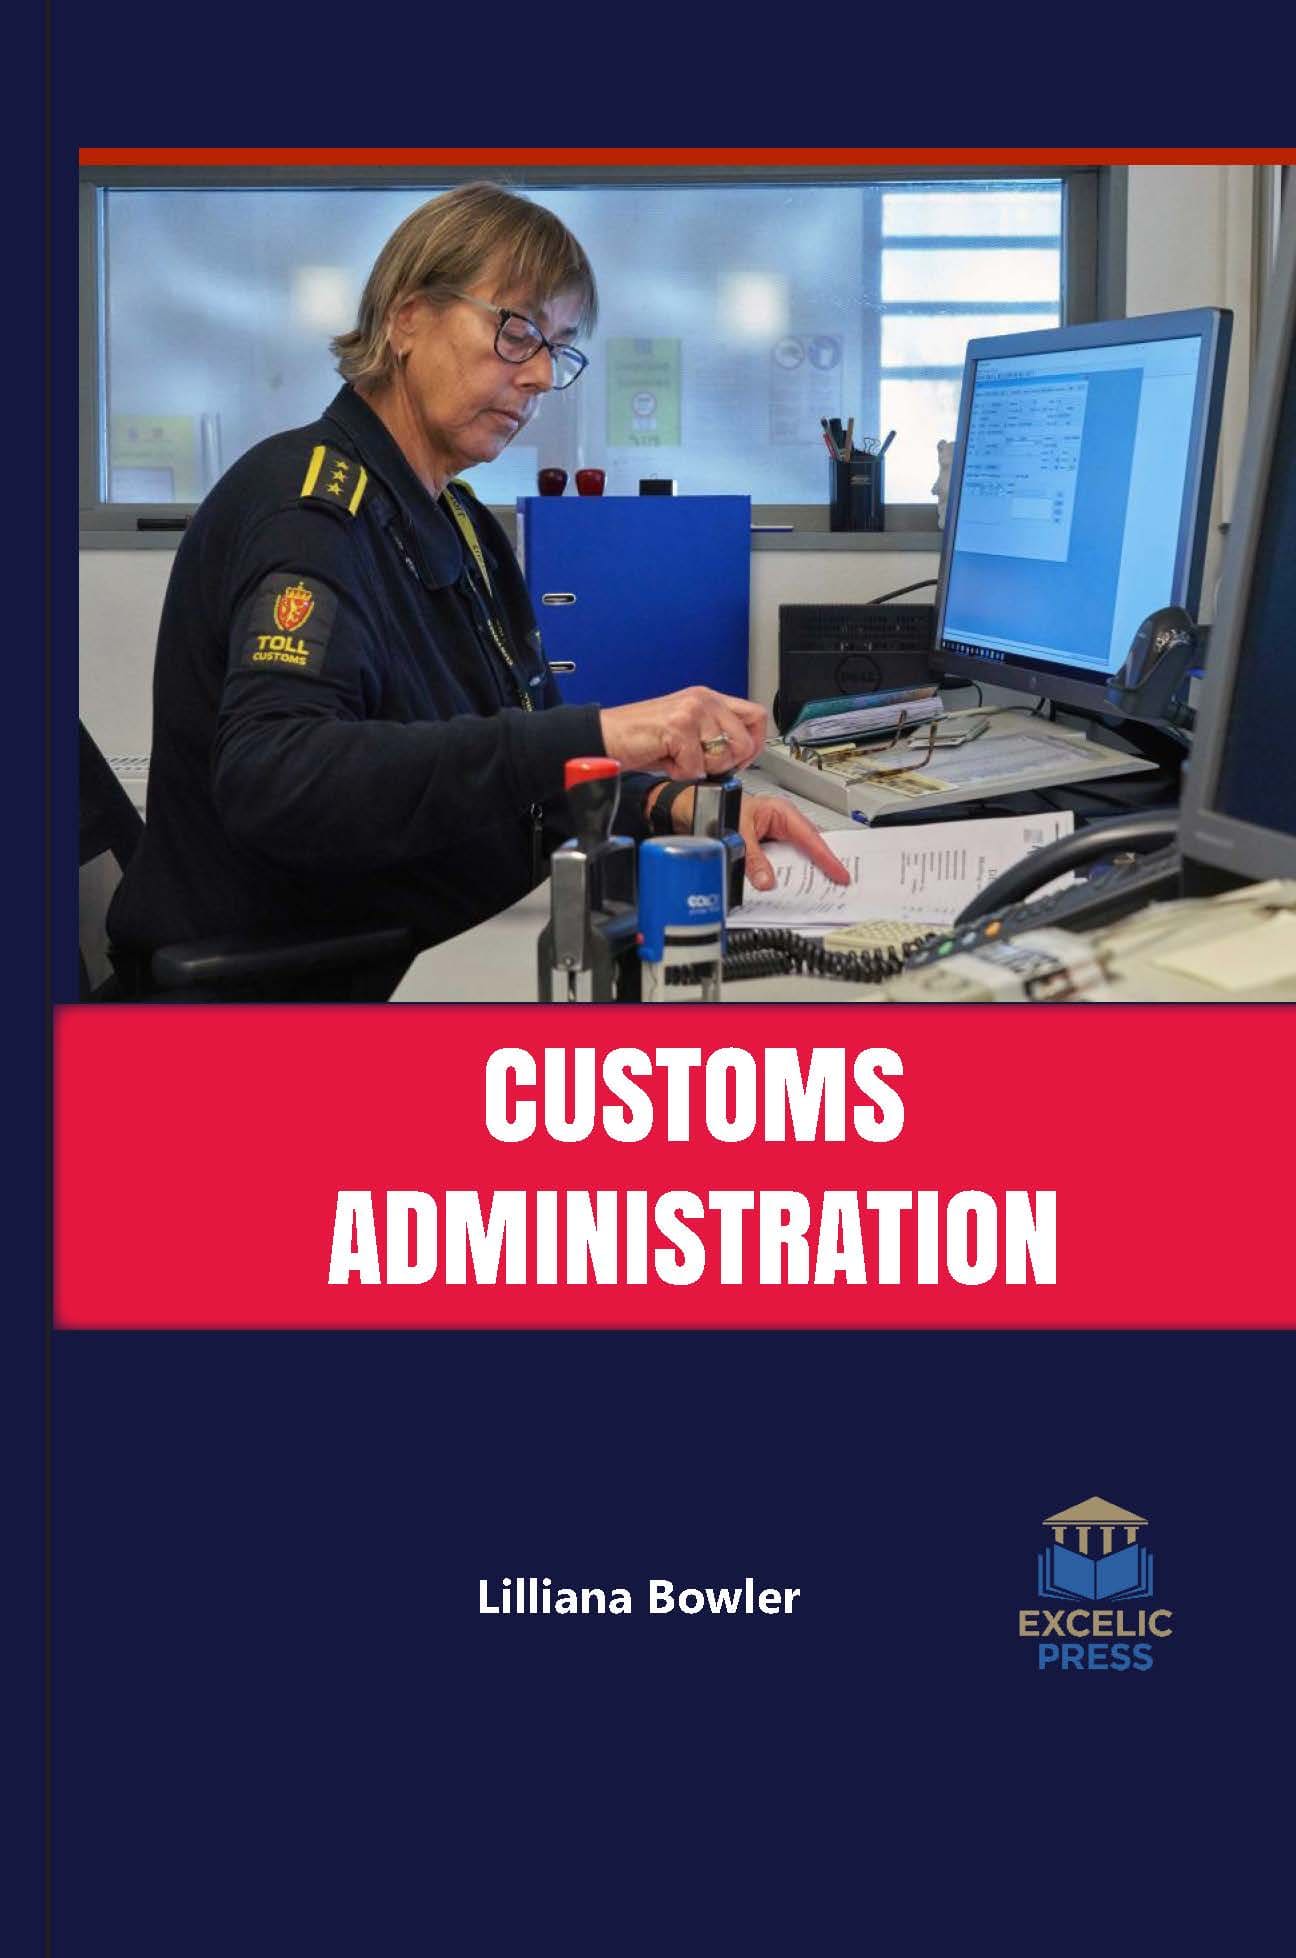 research title examples about customs administration